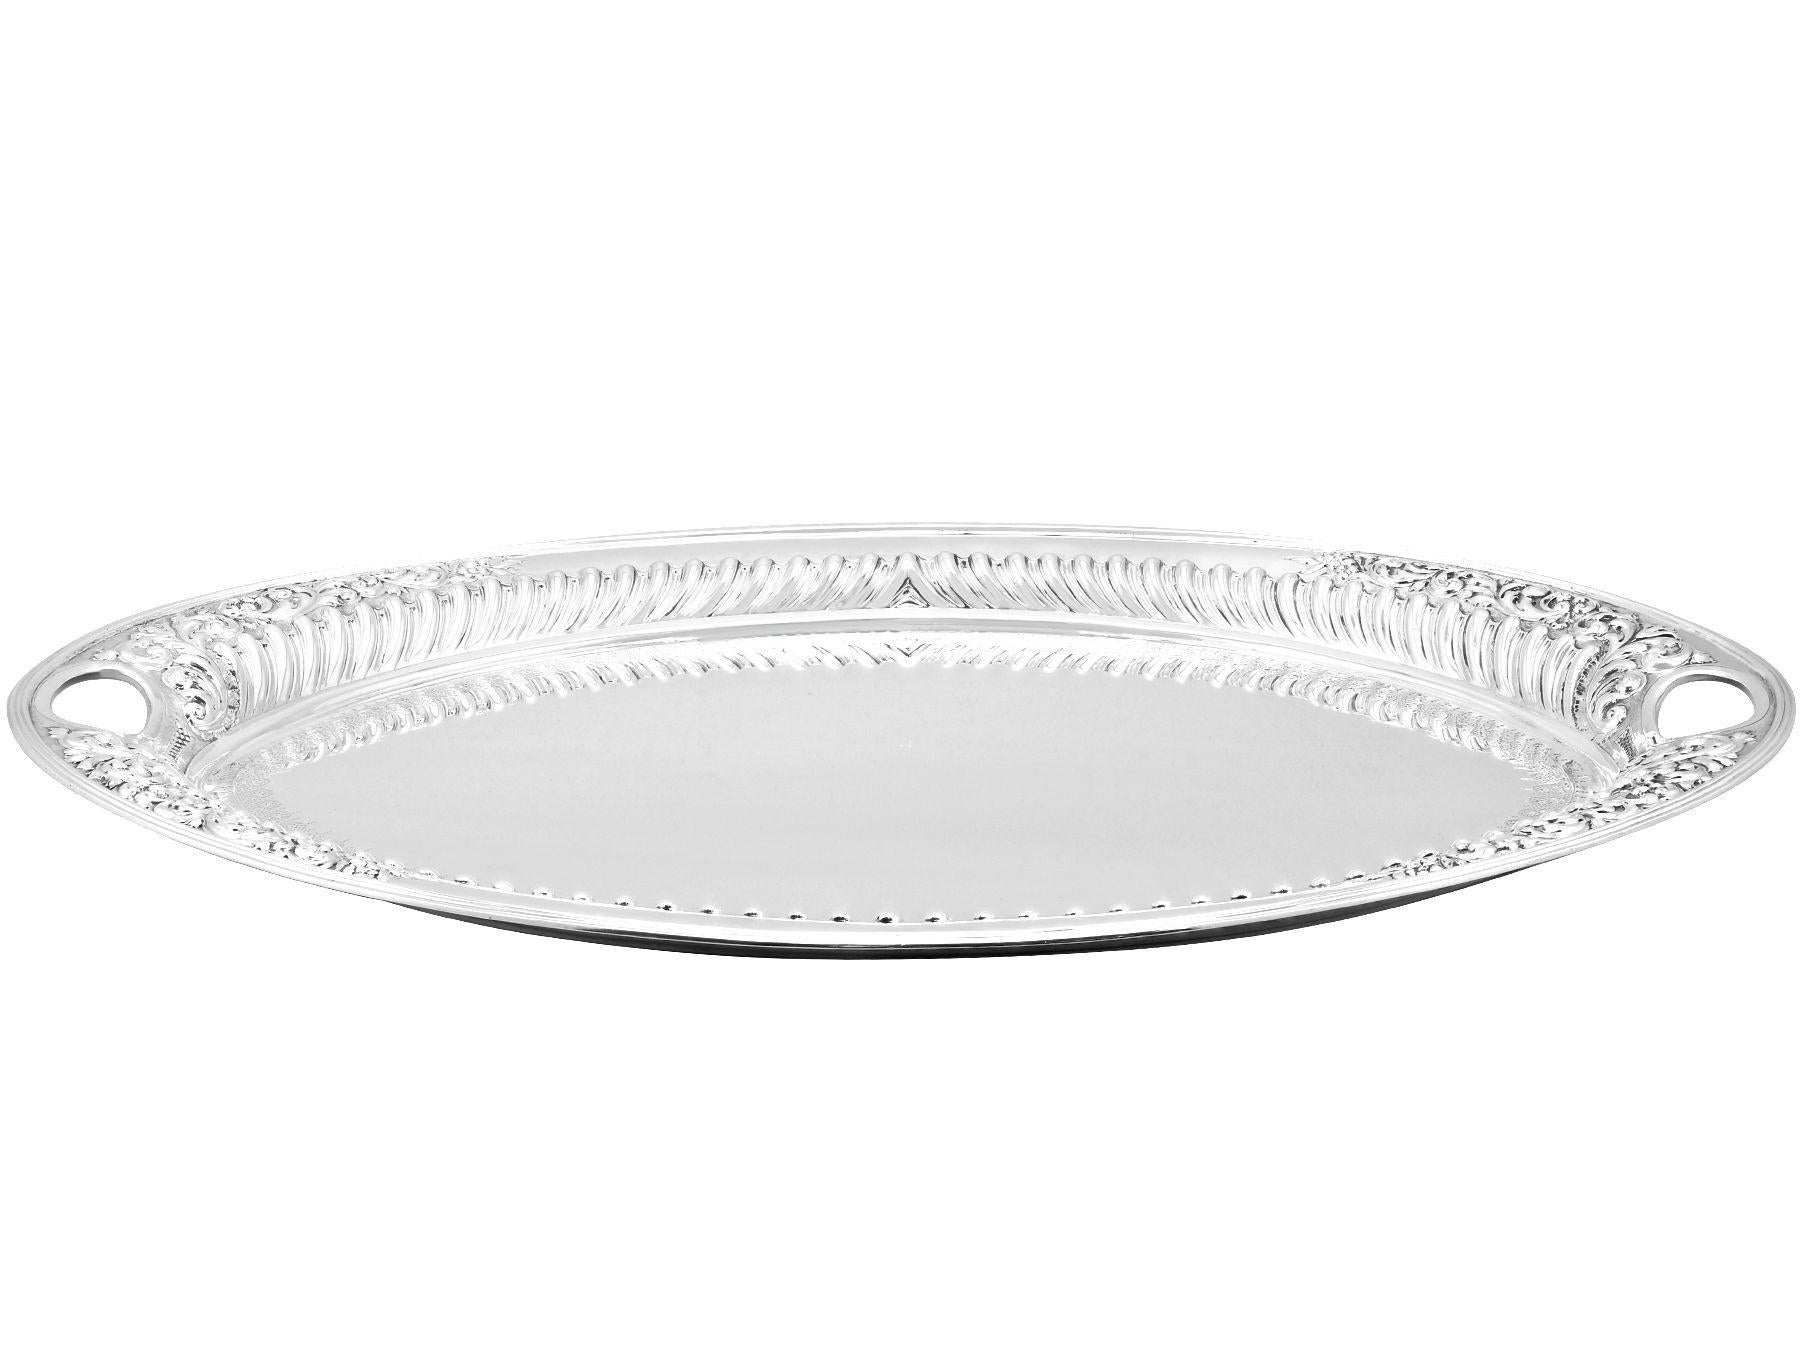 An exceptional, fine and impressive antique Victorian English sterling silver galleried tea tray; an addition to our Victorian teaware collection

This exceptional antique Victorian sterling silver tray has a plain oval form.

The surface of this